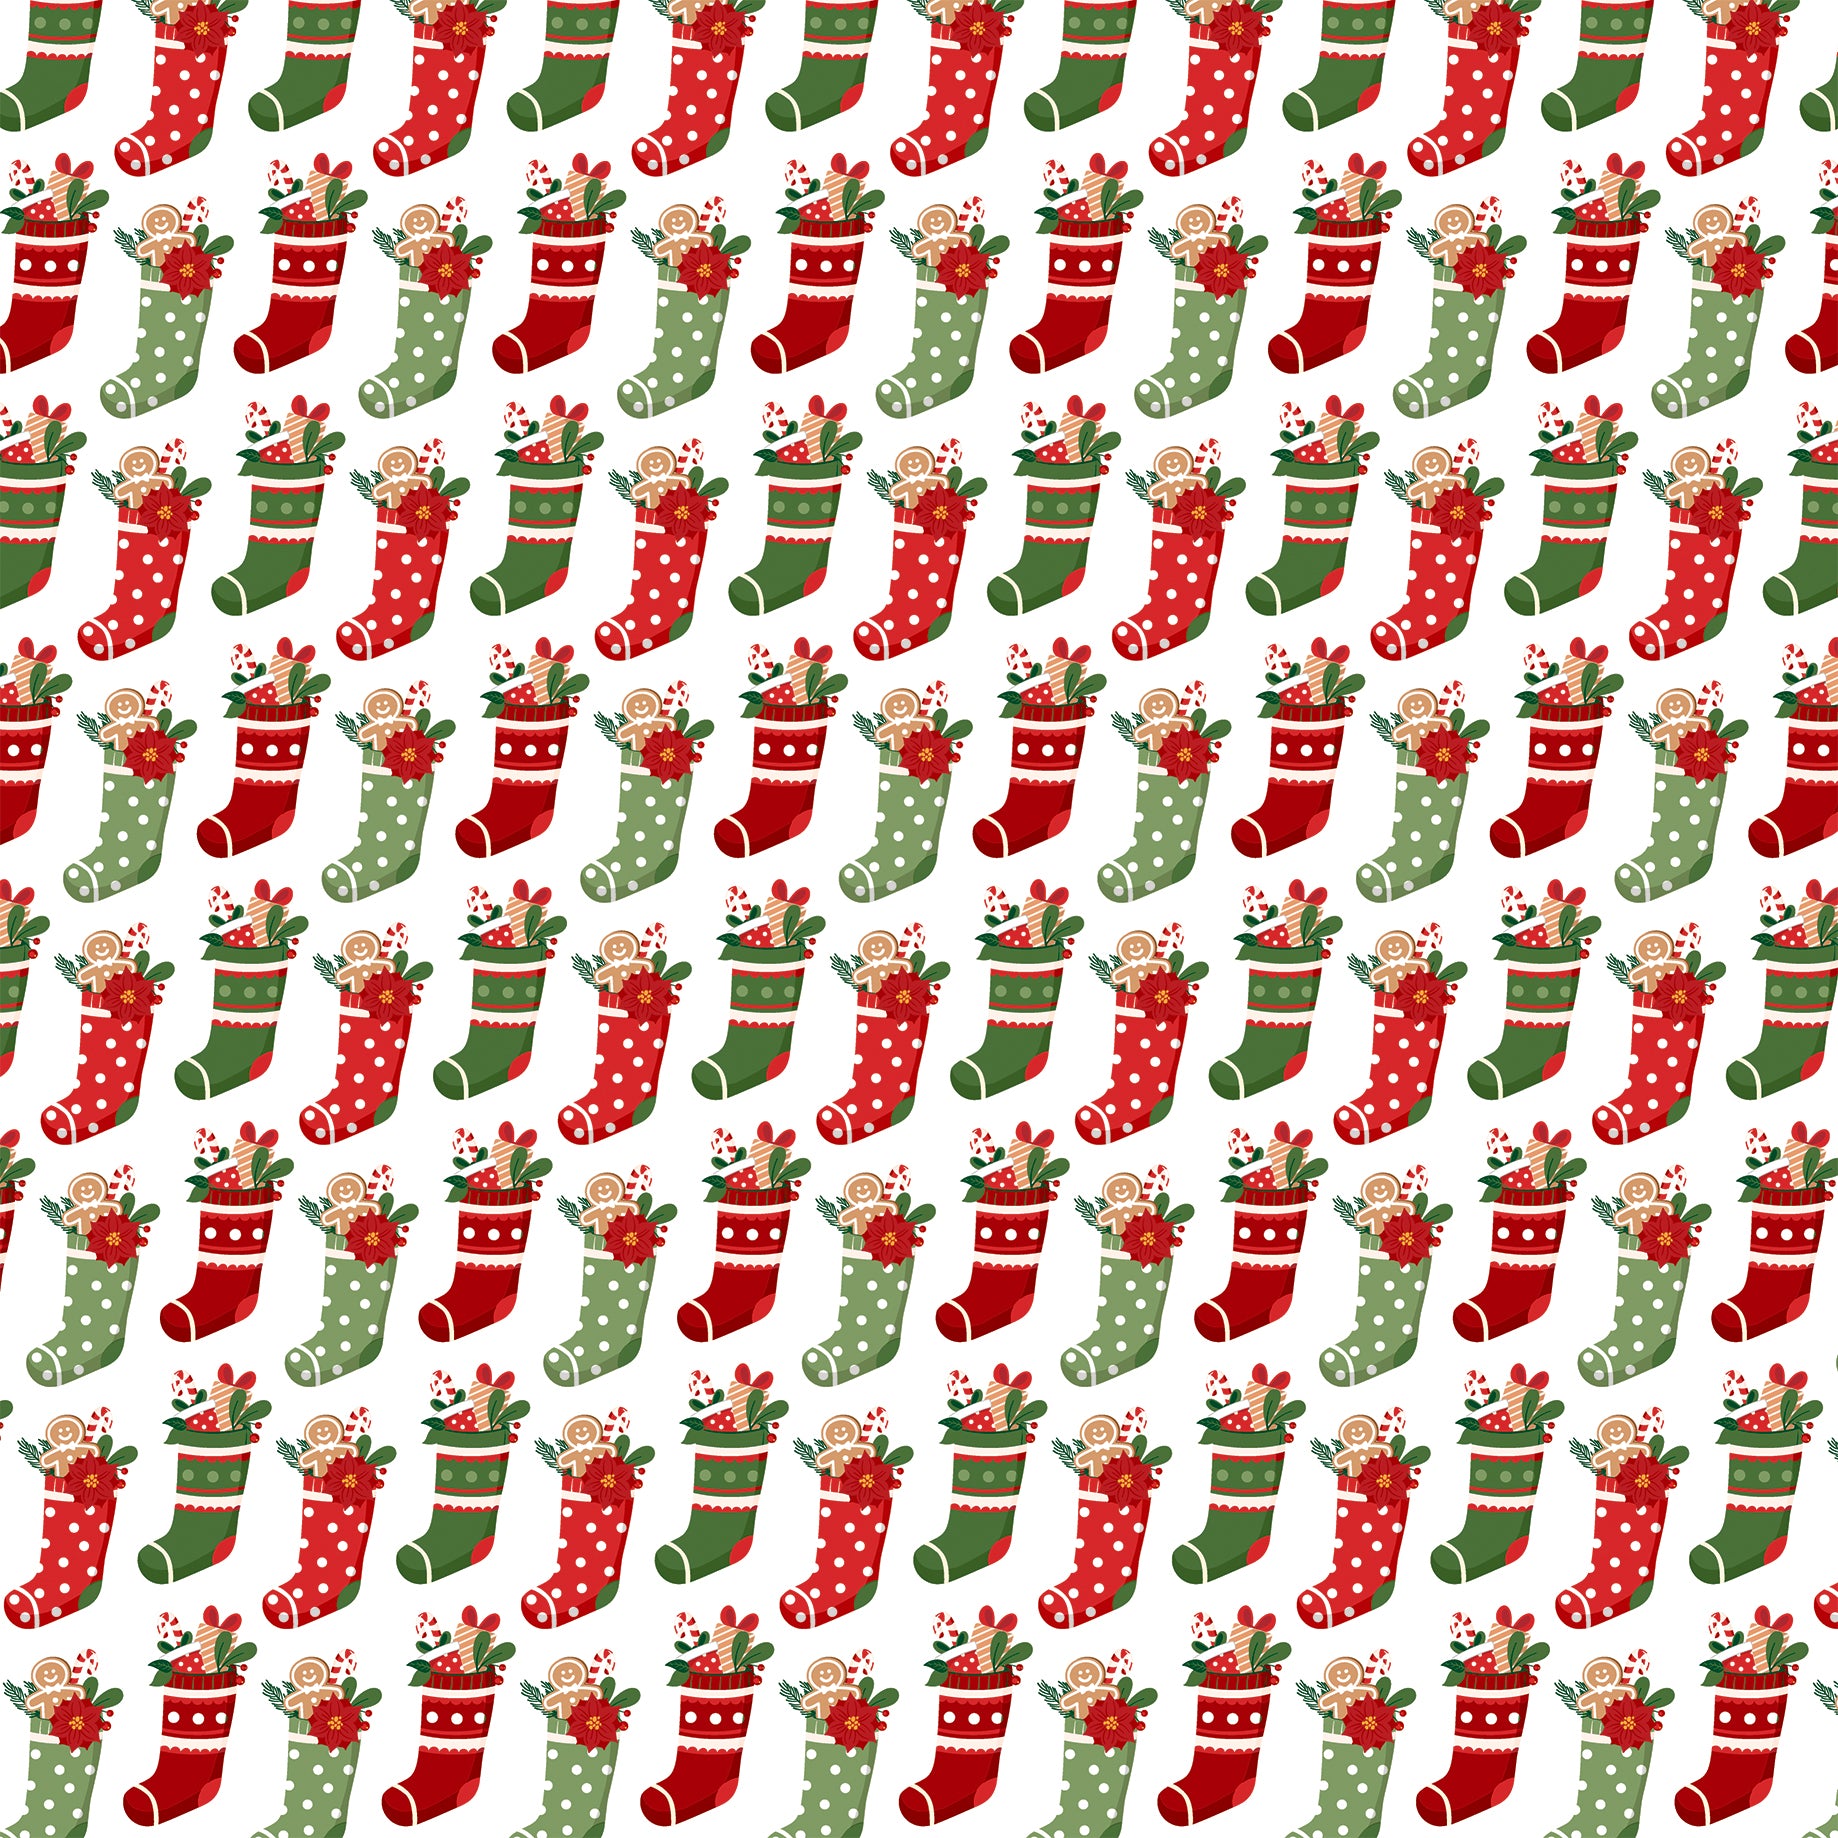 Have A Holly Jolly Christmas Collection Cookie Stockings 12 x 12 Double-Sided Scrapbook Paper by Echo Park Paper